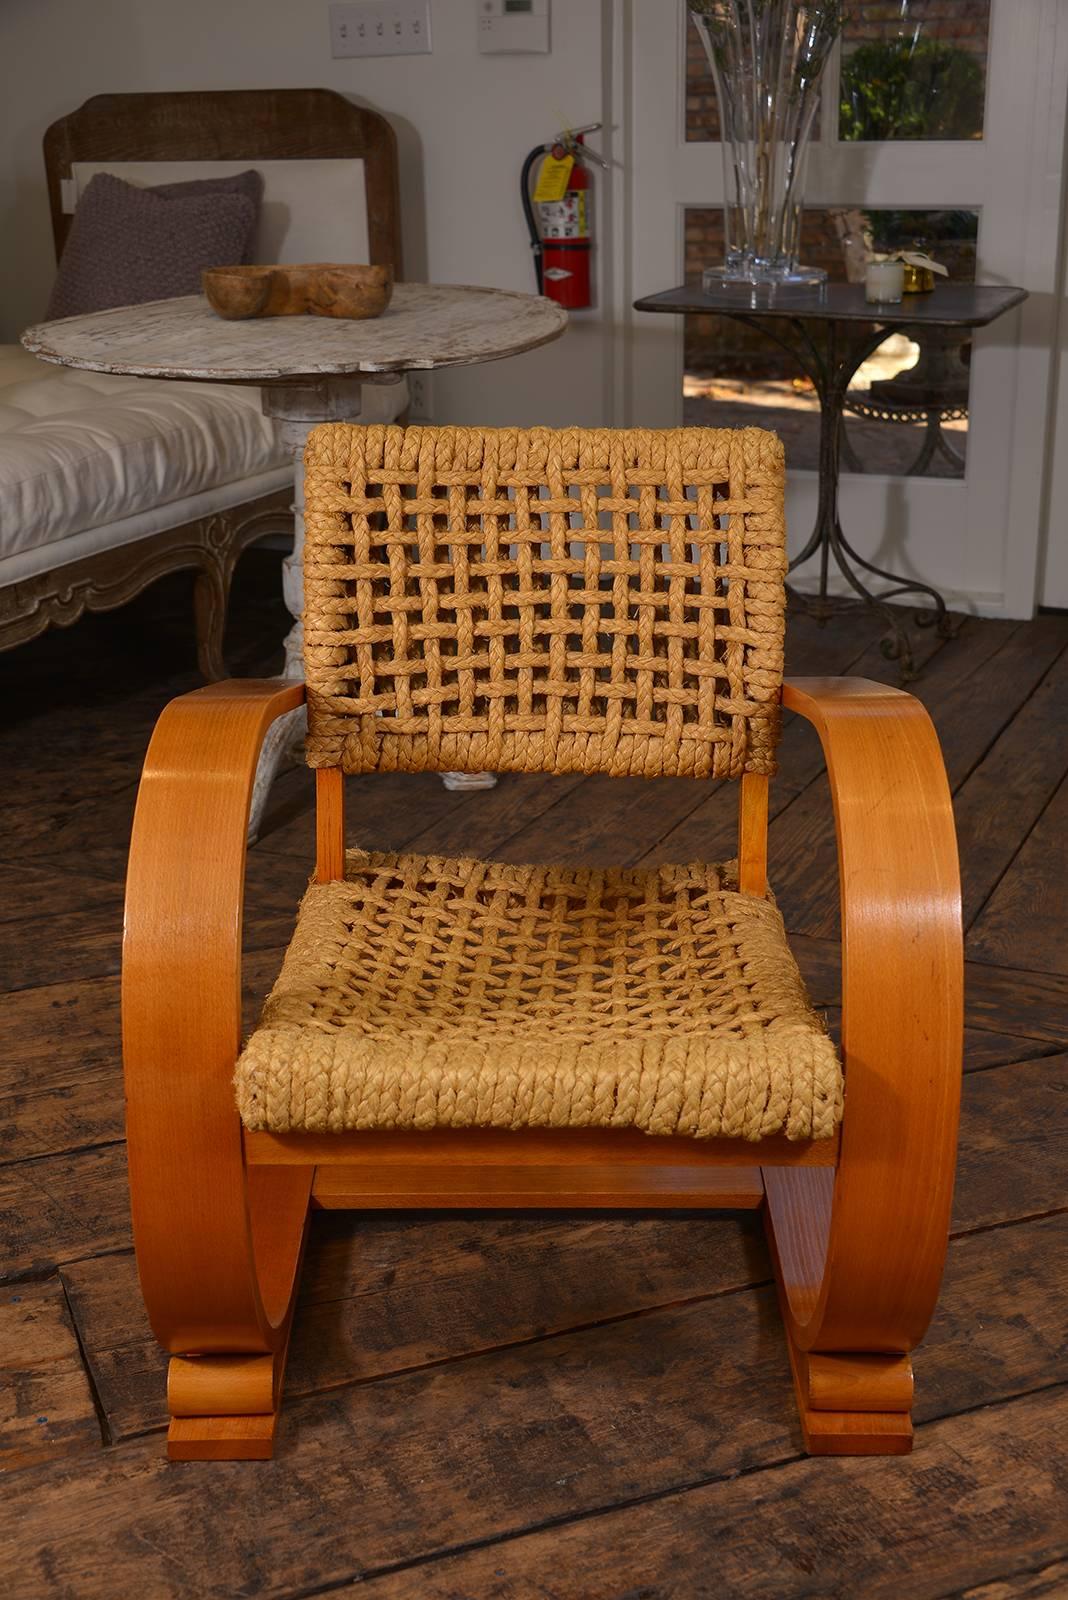 Audoux-Minet, Rope Chairs 2